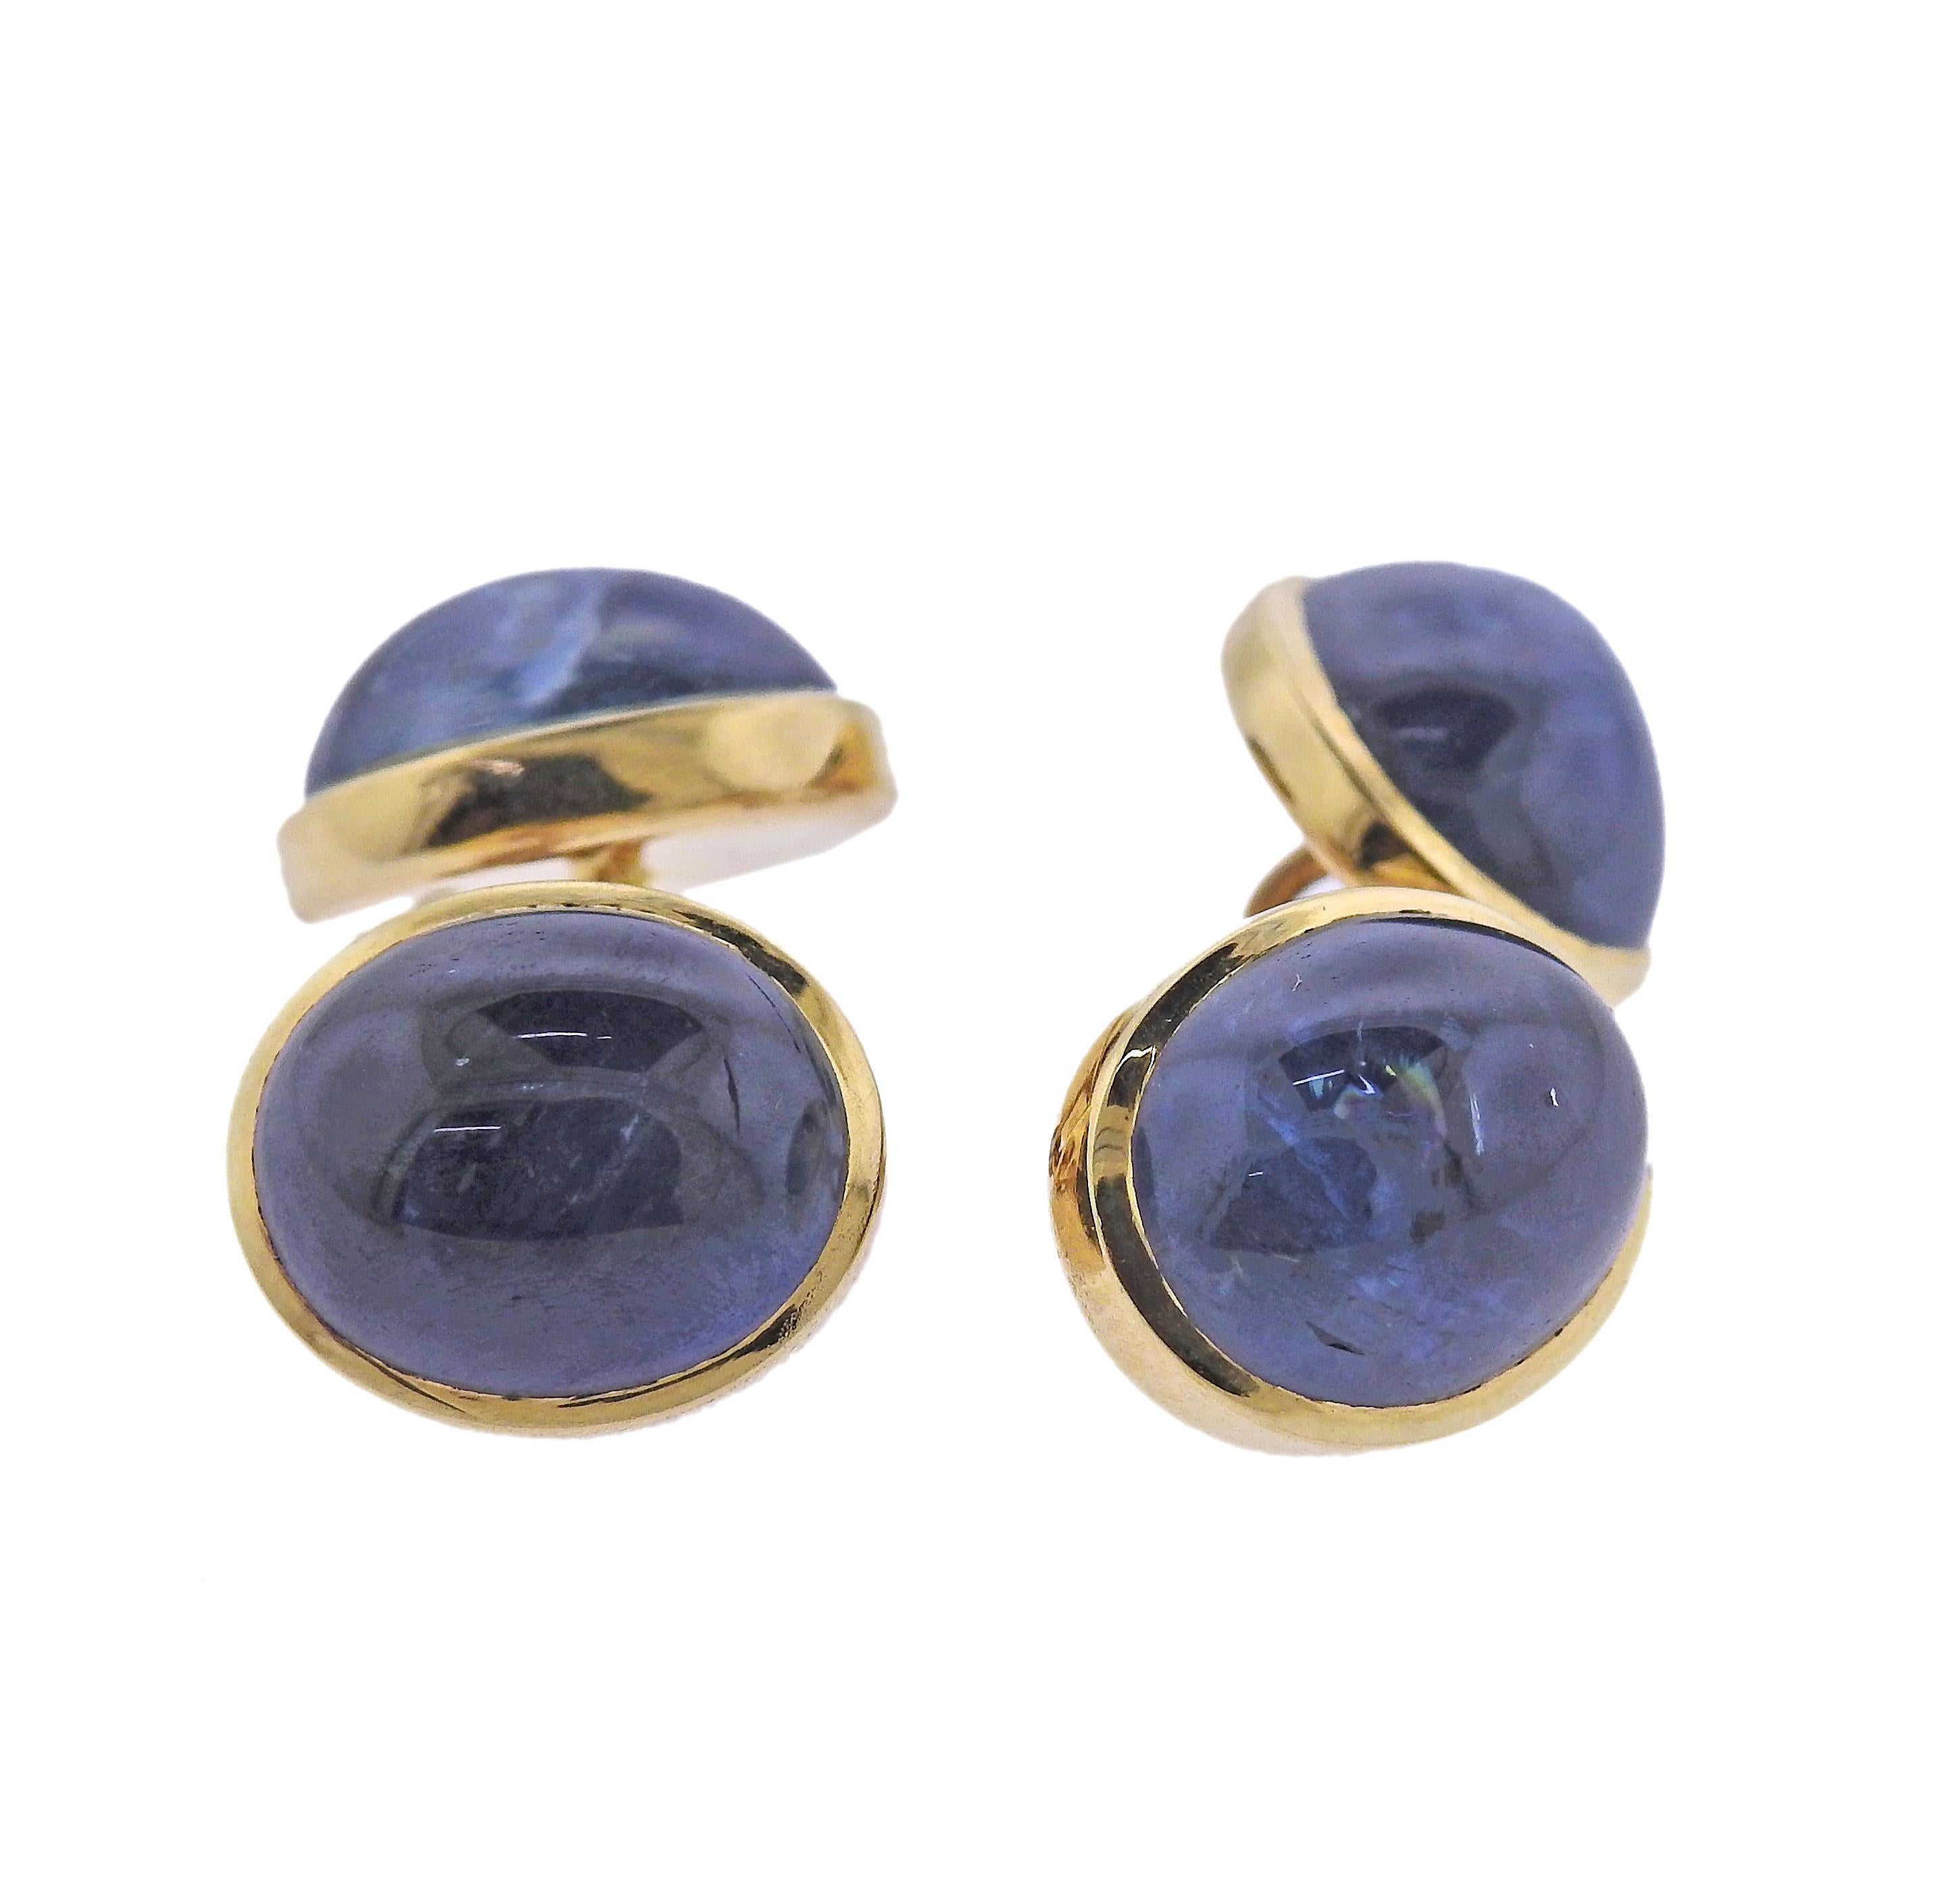 Pair of Trianon 18k gold cufflinks, with sapphire cabochons. Each cufflink top is 13mm x 11mm. Marked Trianon , 18k. Weight - 12.6 grams. 